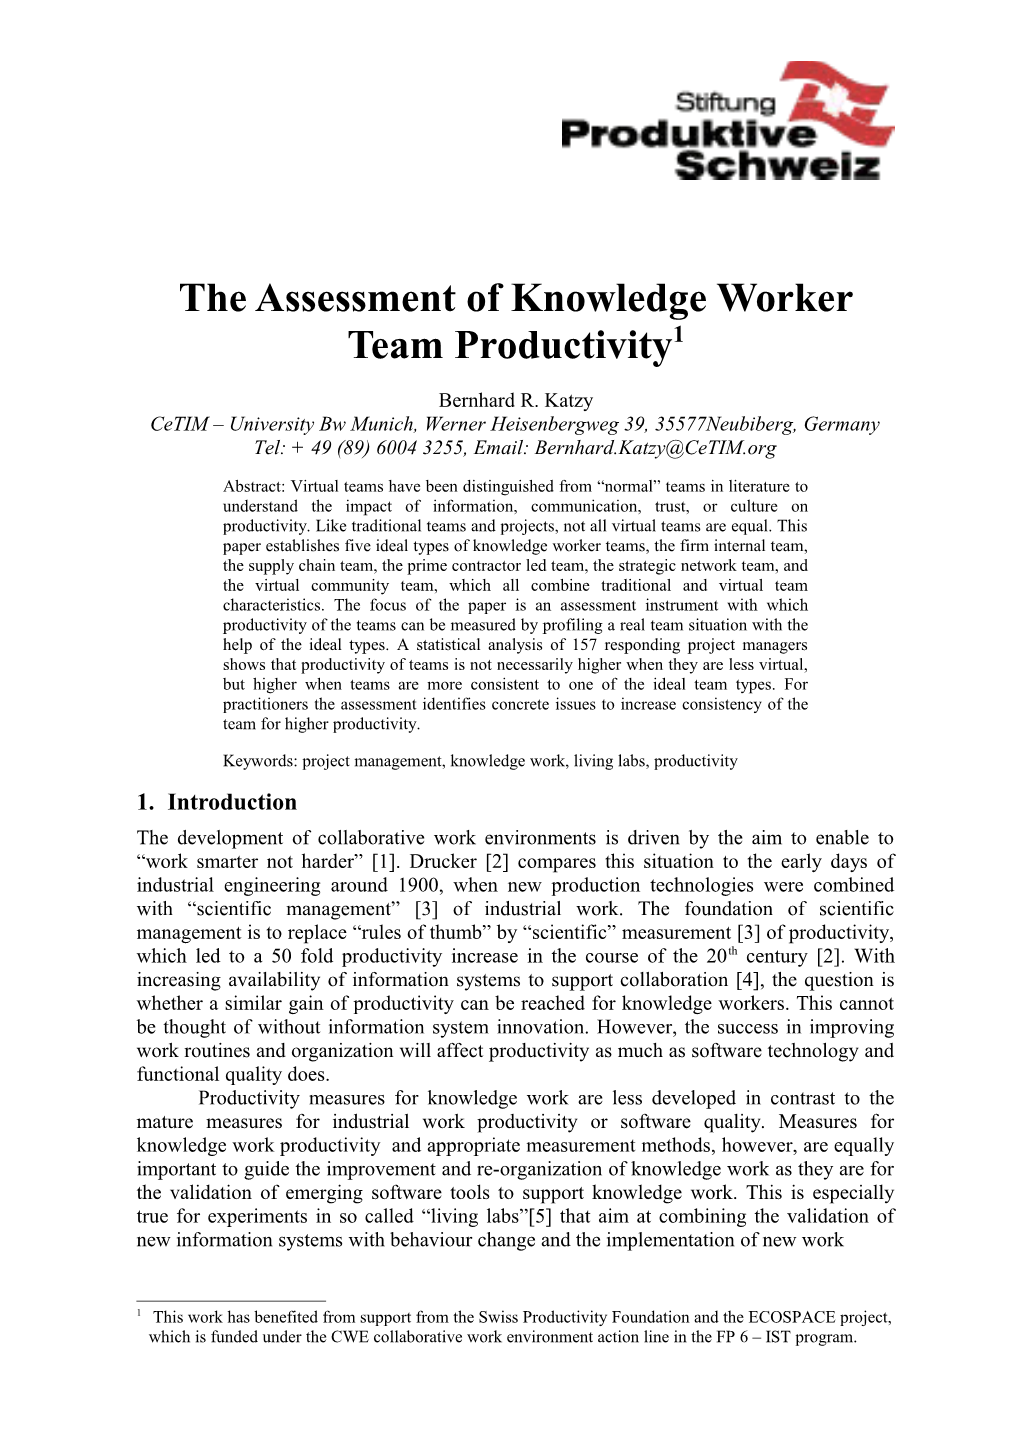 The Assessment of Knowledge Worker Team Productivity 1